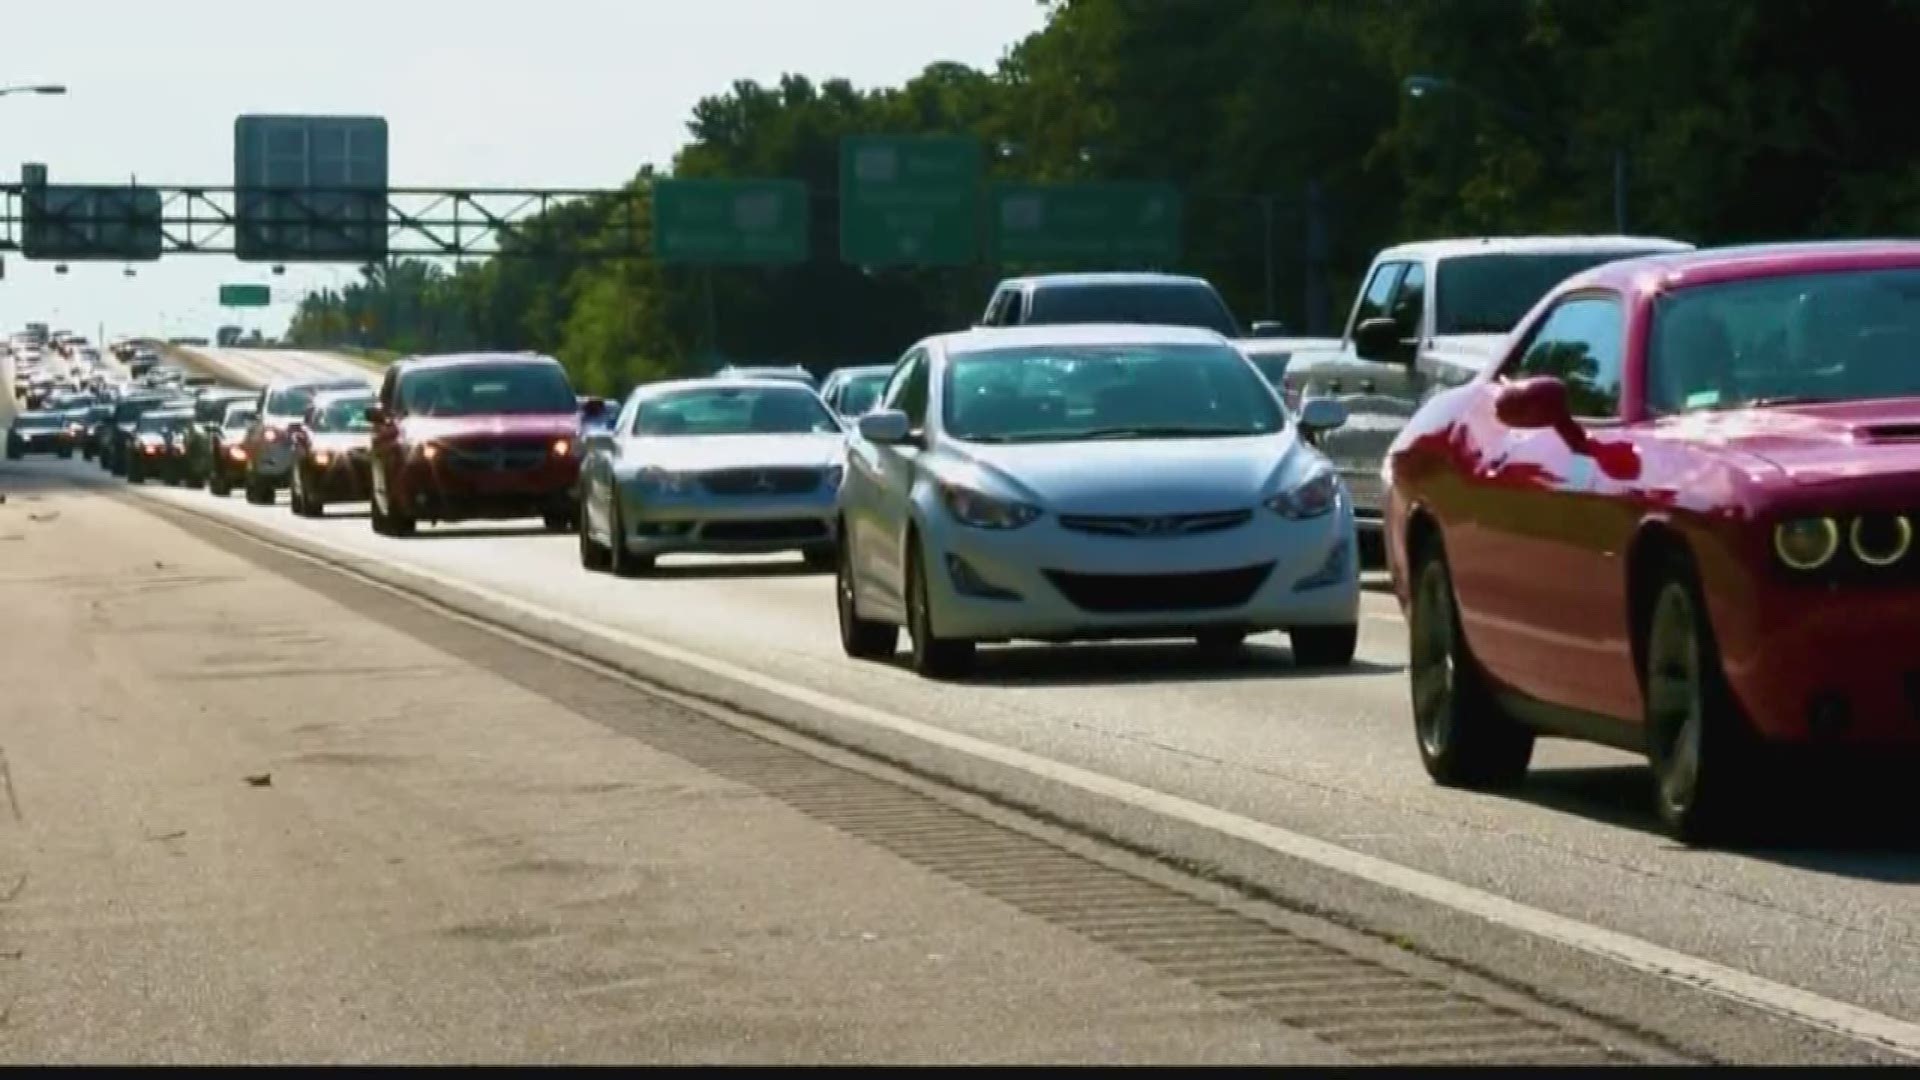 There are new projects in the works that would widen some parts of the interstate to up to 8 lanes on just one side of I-95 to alleviate traffic with tolls.